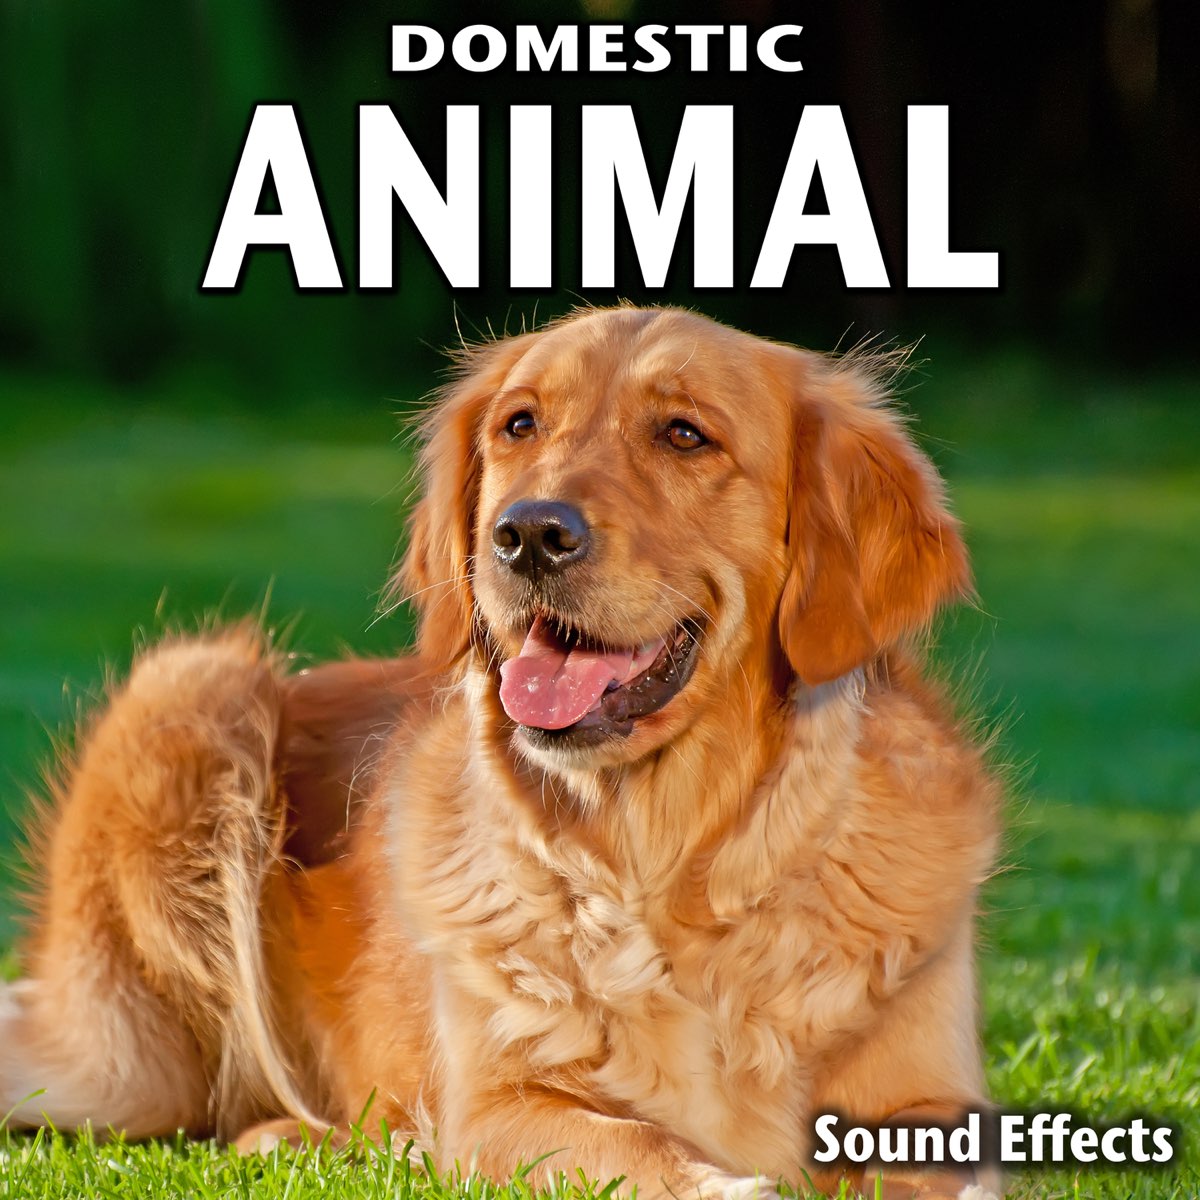 Domestic Animal Sound Effects by Sound Ideas on Apple Music